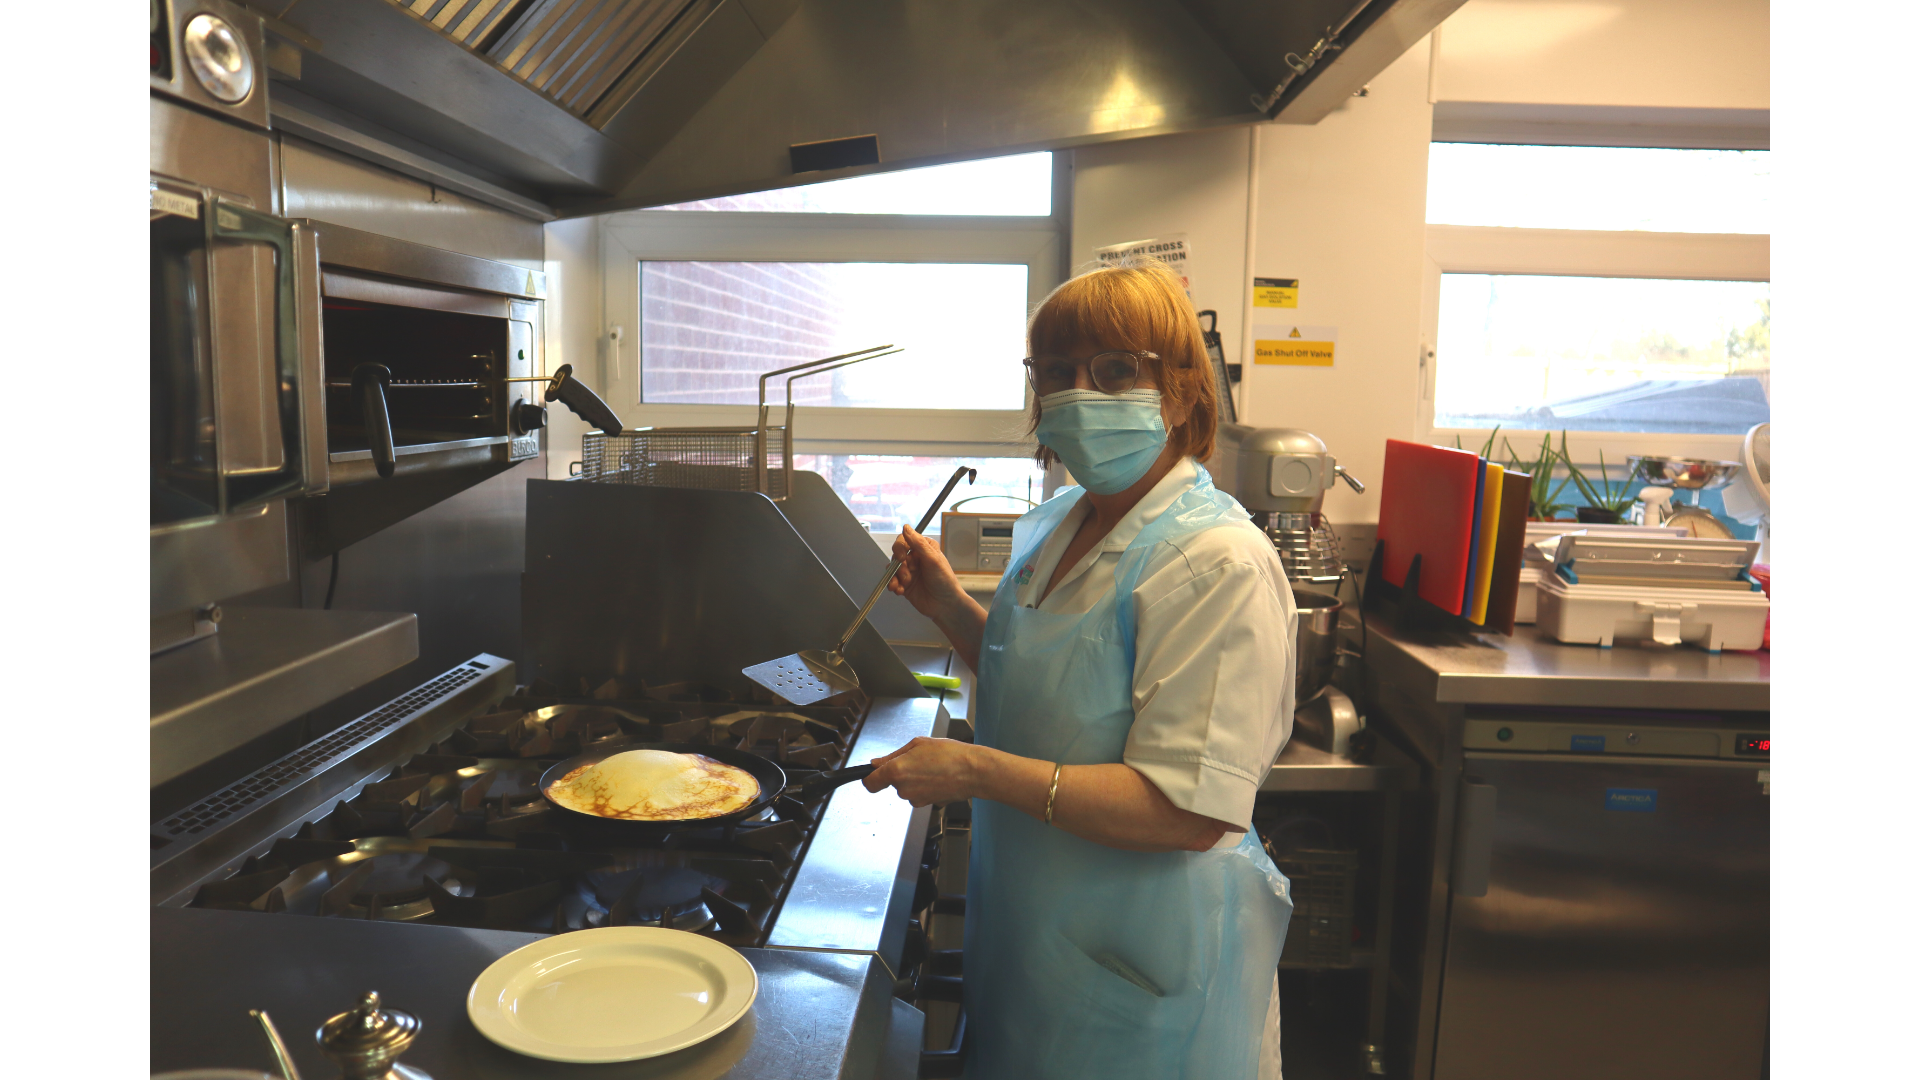 Karen Wood – Works as a Cook on the Hospice Catering Team 